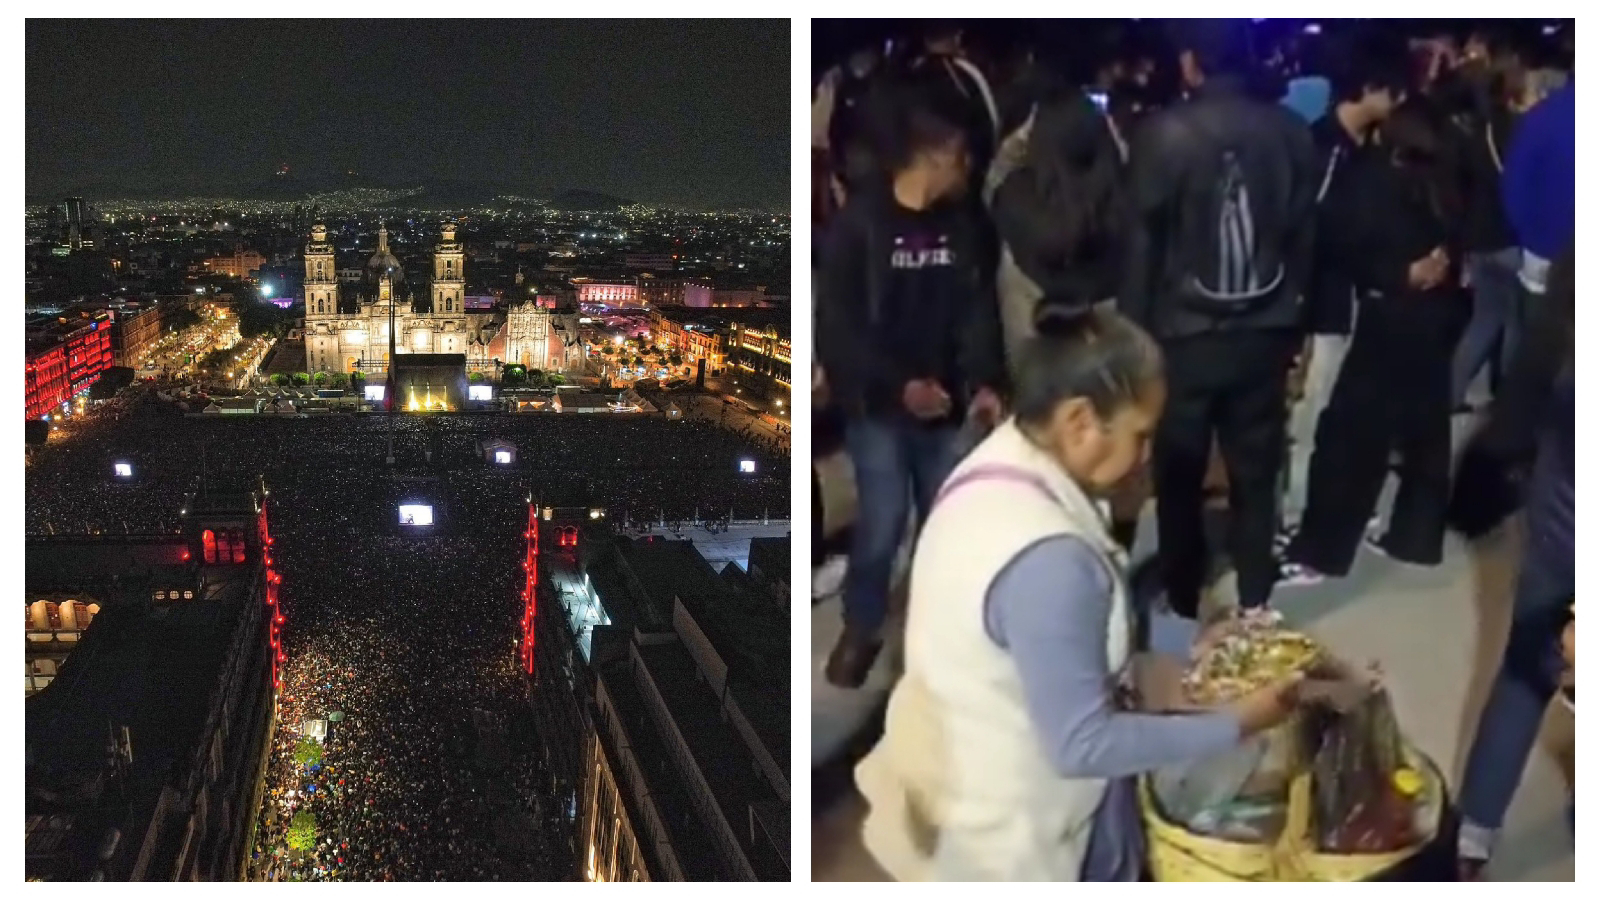 VIDEO Mexican woman selling food in middle of 160K crowd